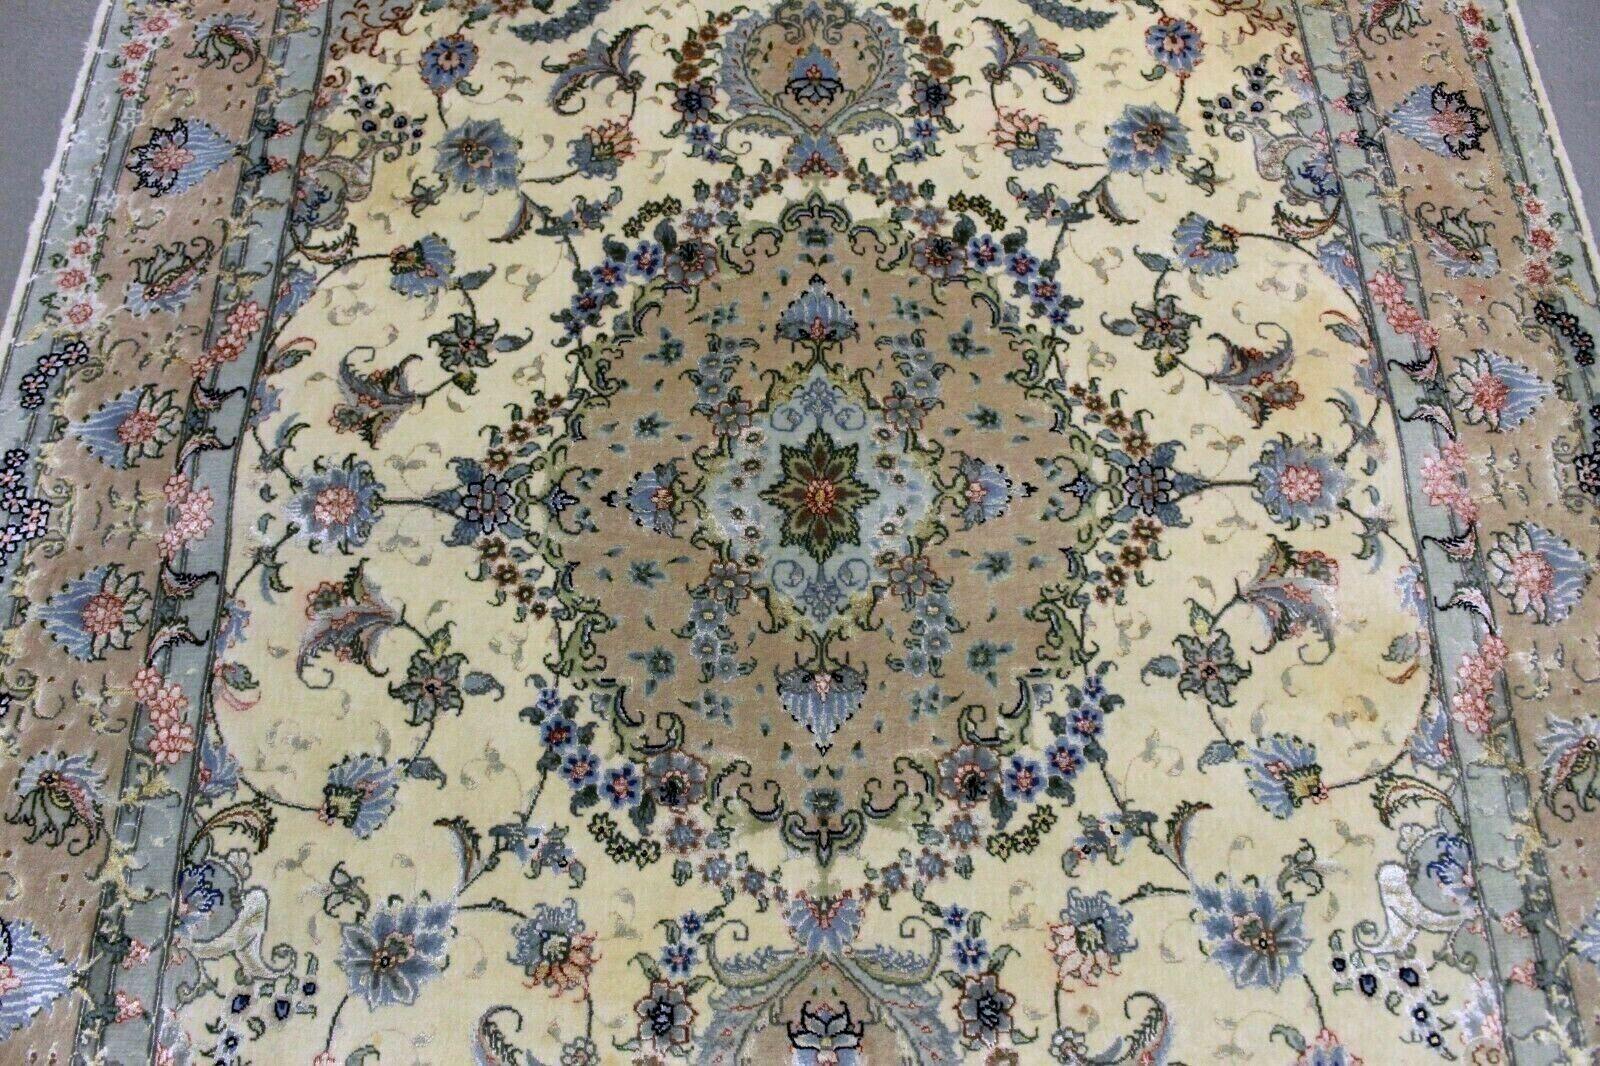 Hand-Knotted Handmade Vintage Persian Style Tabriz Rug With Silk 3.2' x 5.4', 1970s - 1K46 For Sale